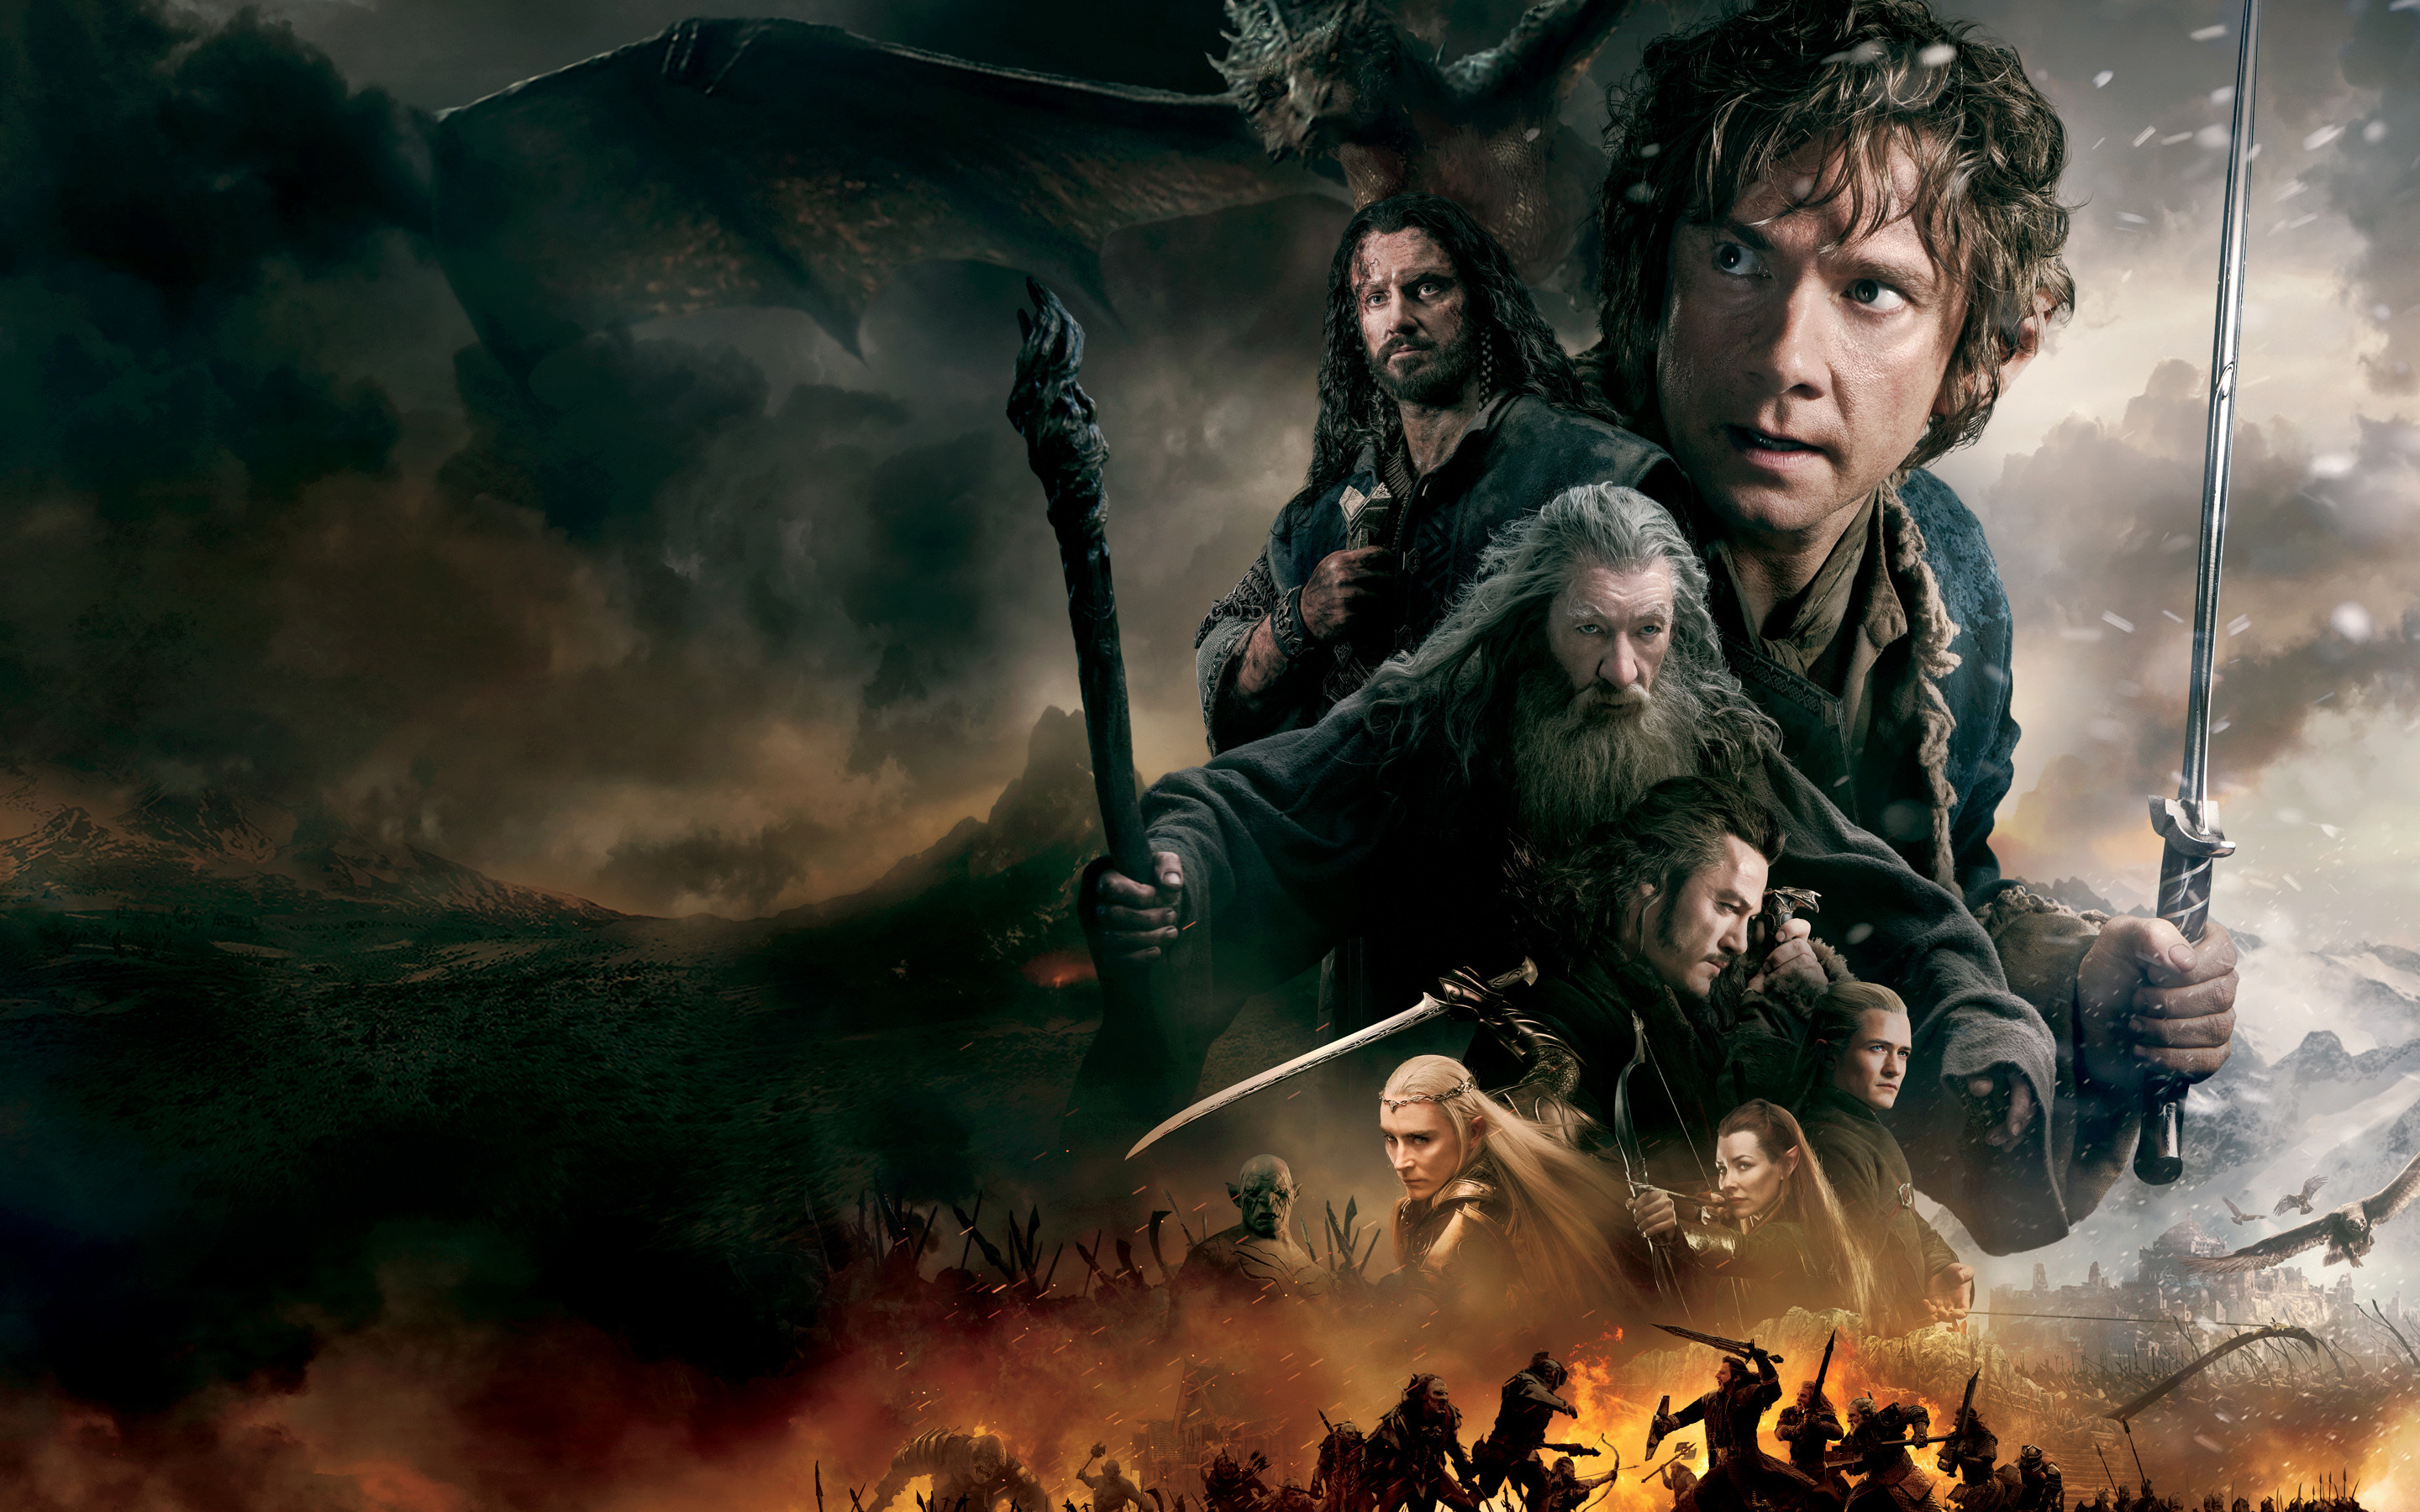 2880x1800 The Hobbit: The Battle of the Five Armies Wallpapers